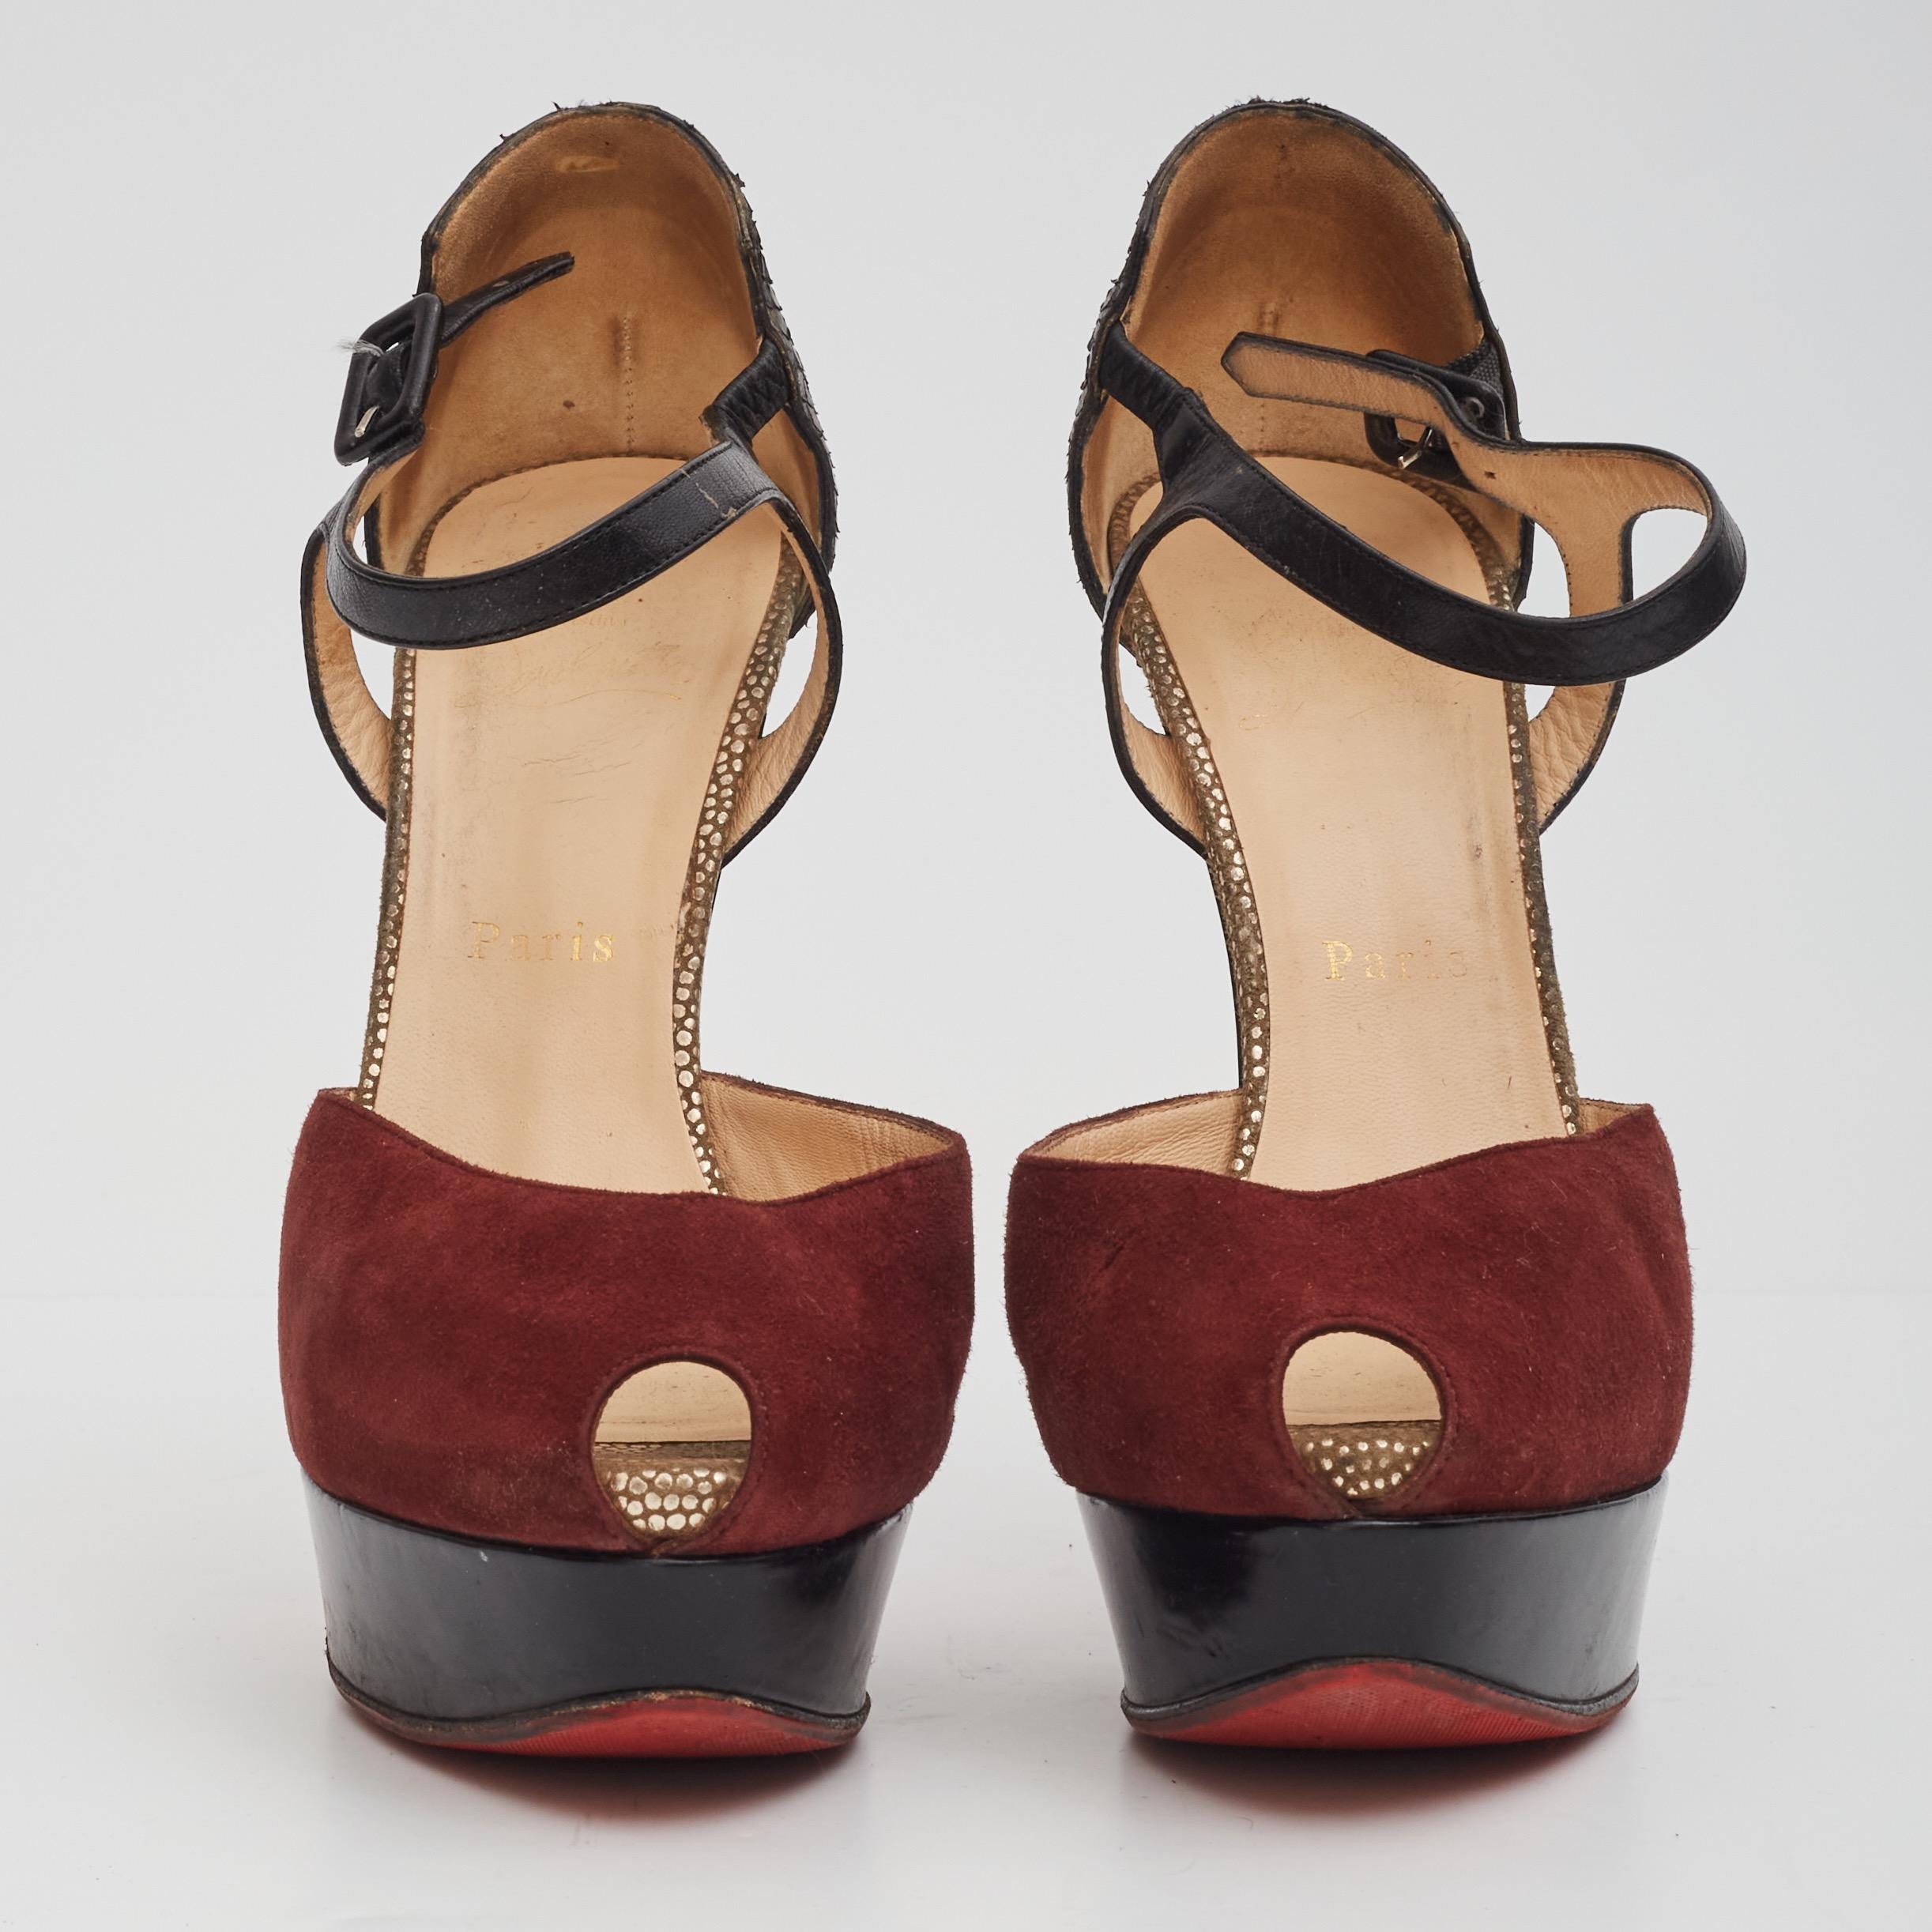 Christian Louboutin platform heels are made with burgundy suede and brown snake. The heels features a peep toe, a 25mm (1inch) platform, 150mm (6inch) heels and an ankle strap for support.

Color/material: Burgundy suede and snake skin brown
Size: